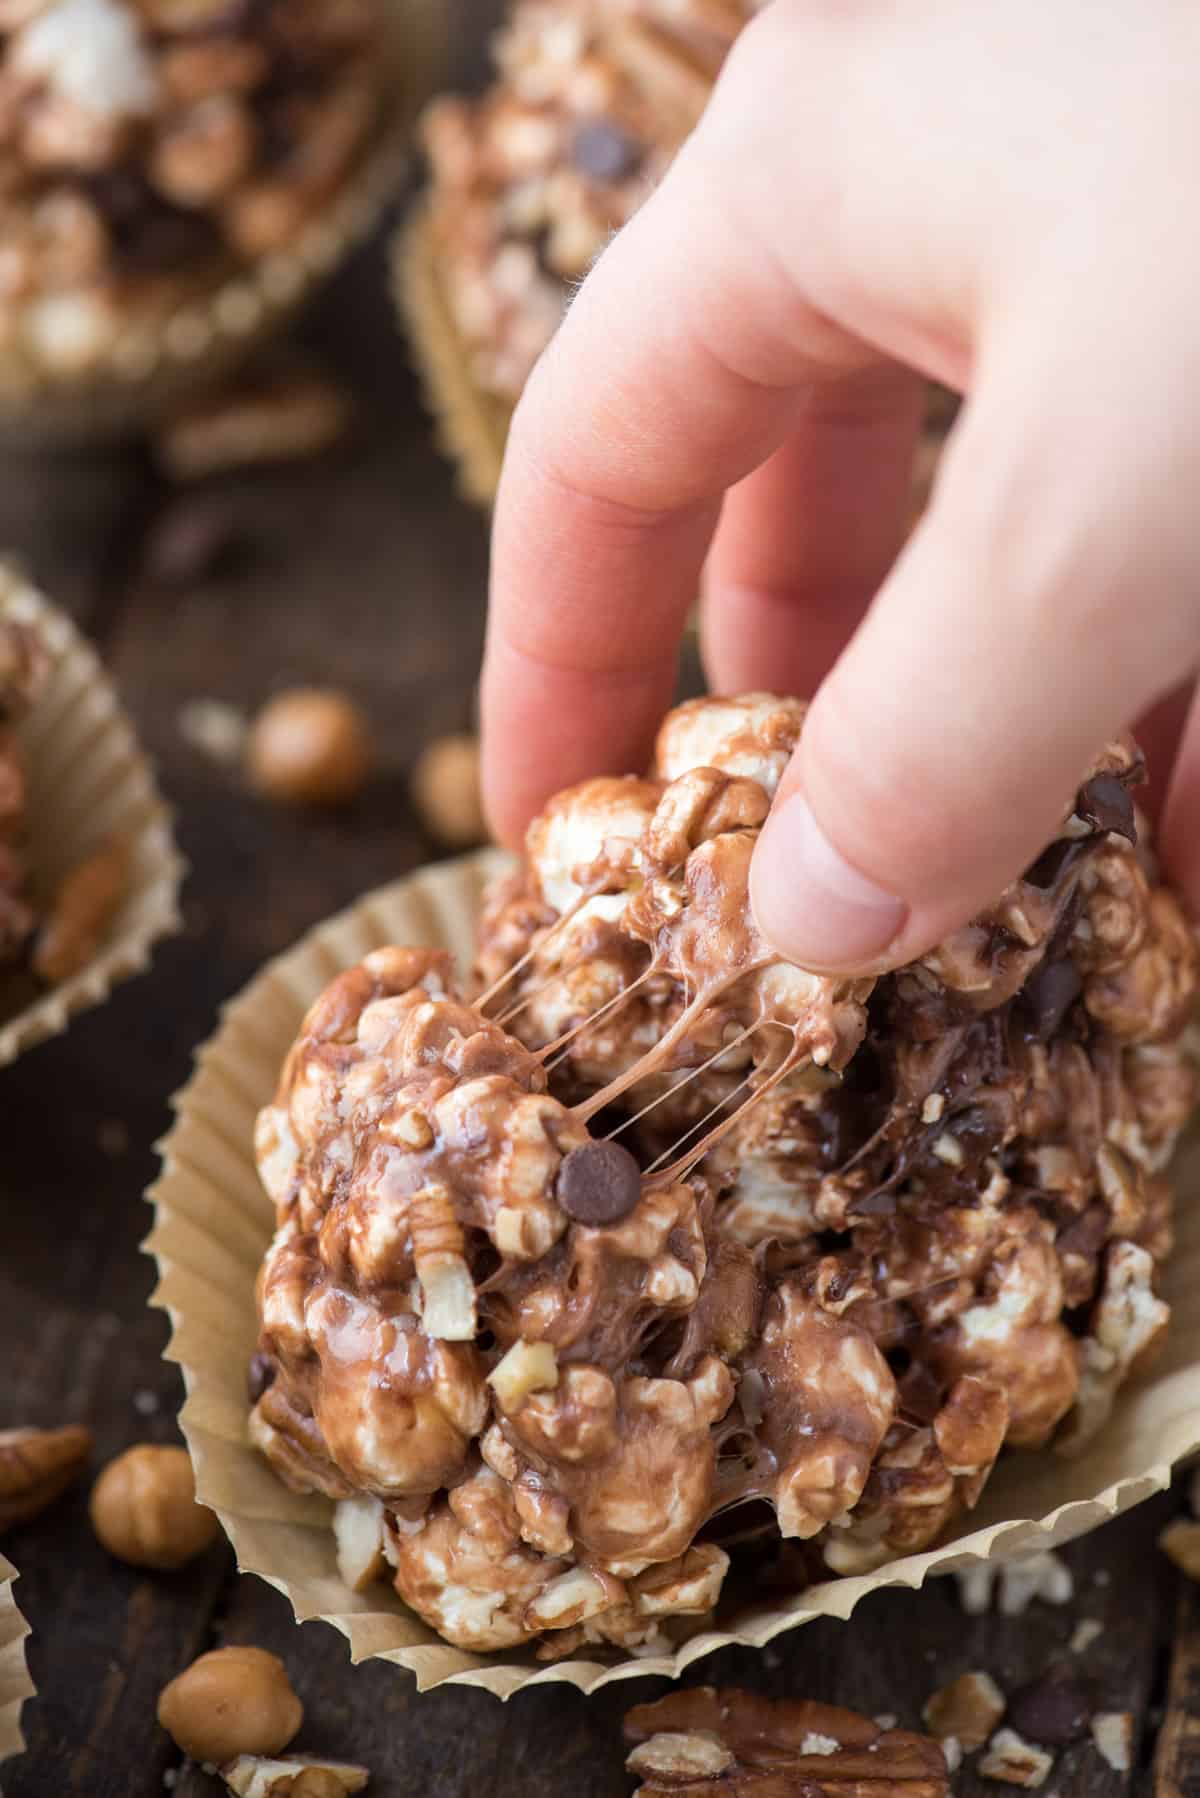 turtle popcorn ball with caramel, chocolate and pecans with hand in the picture